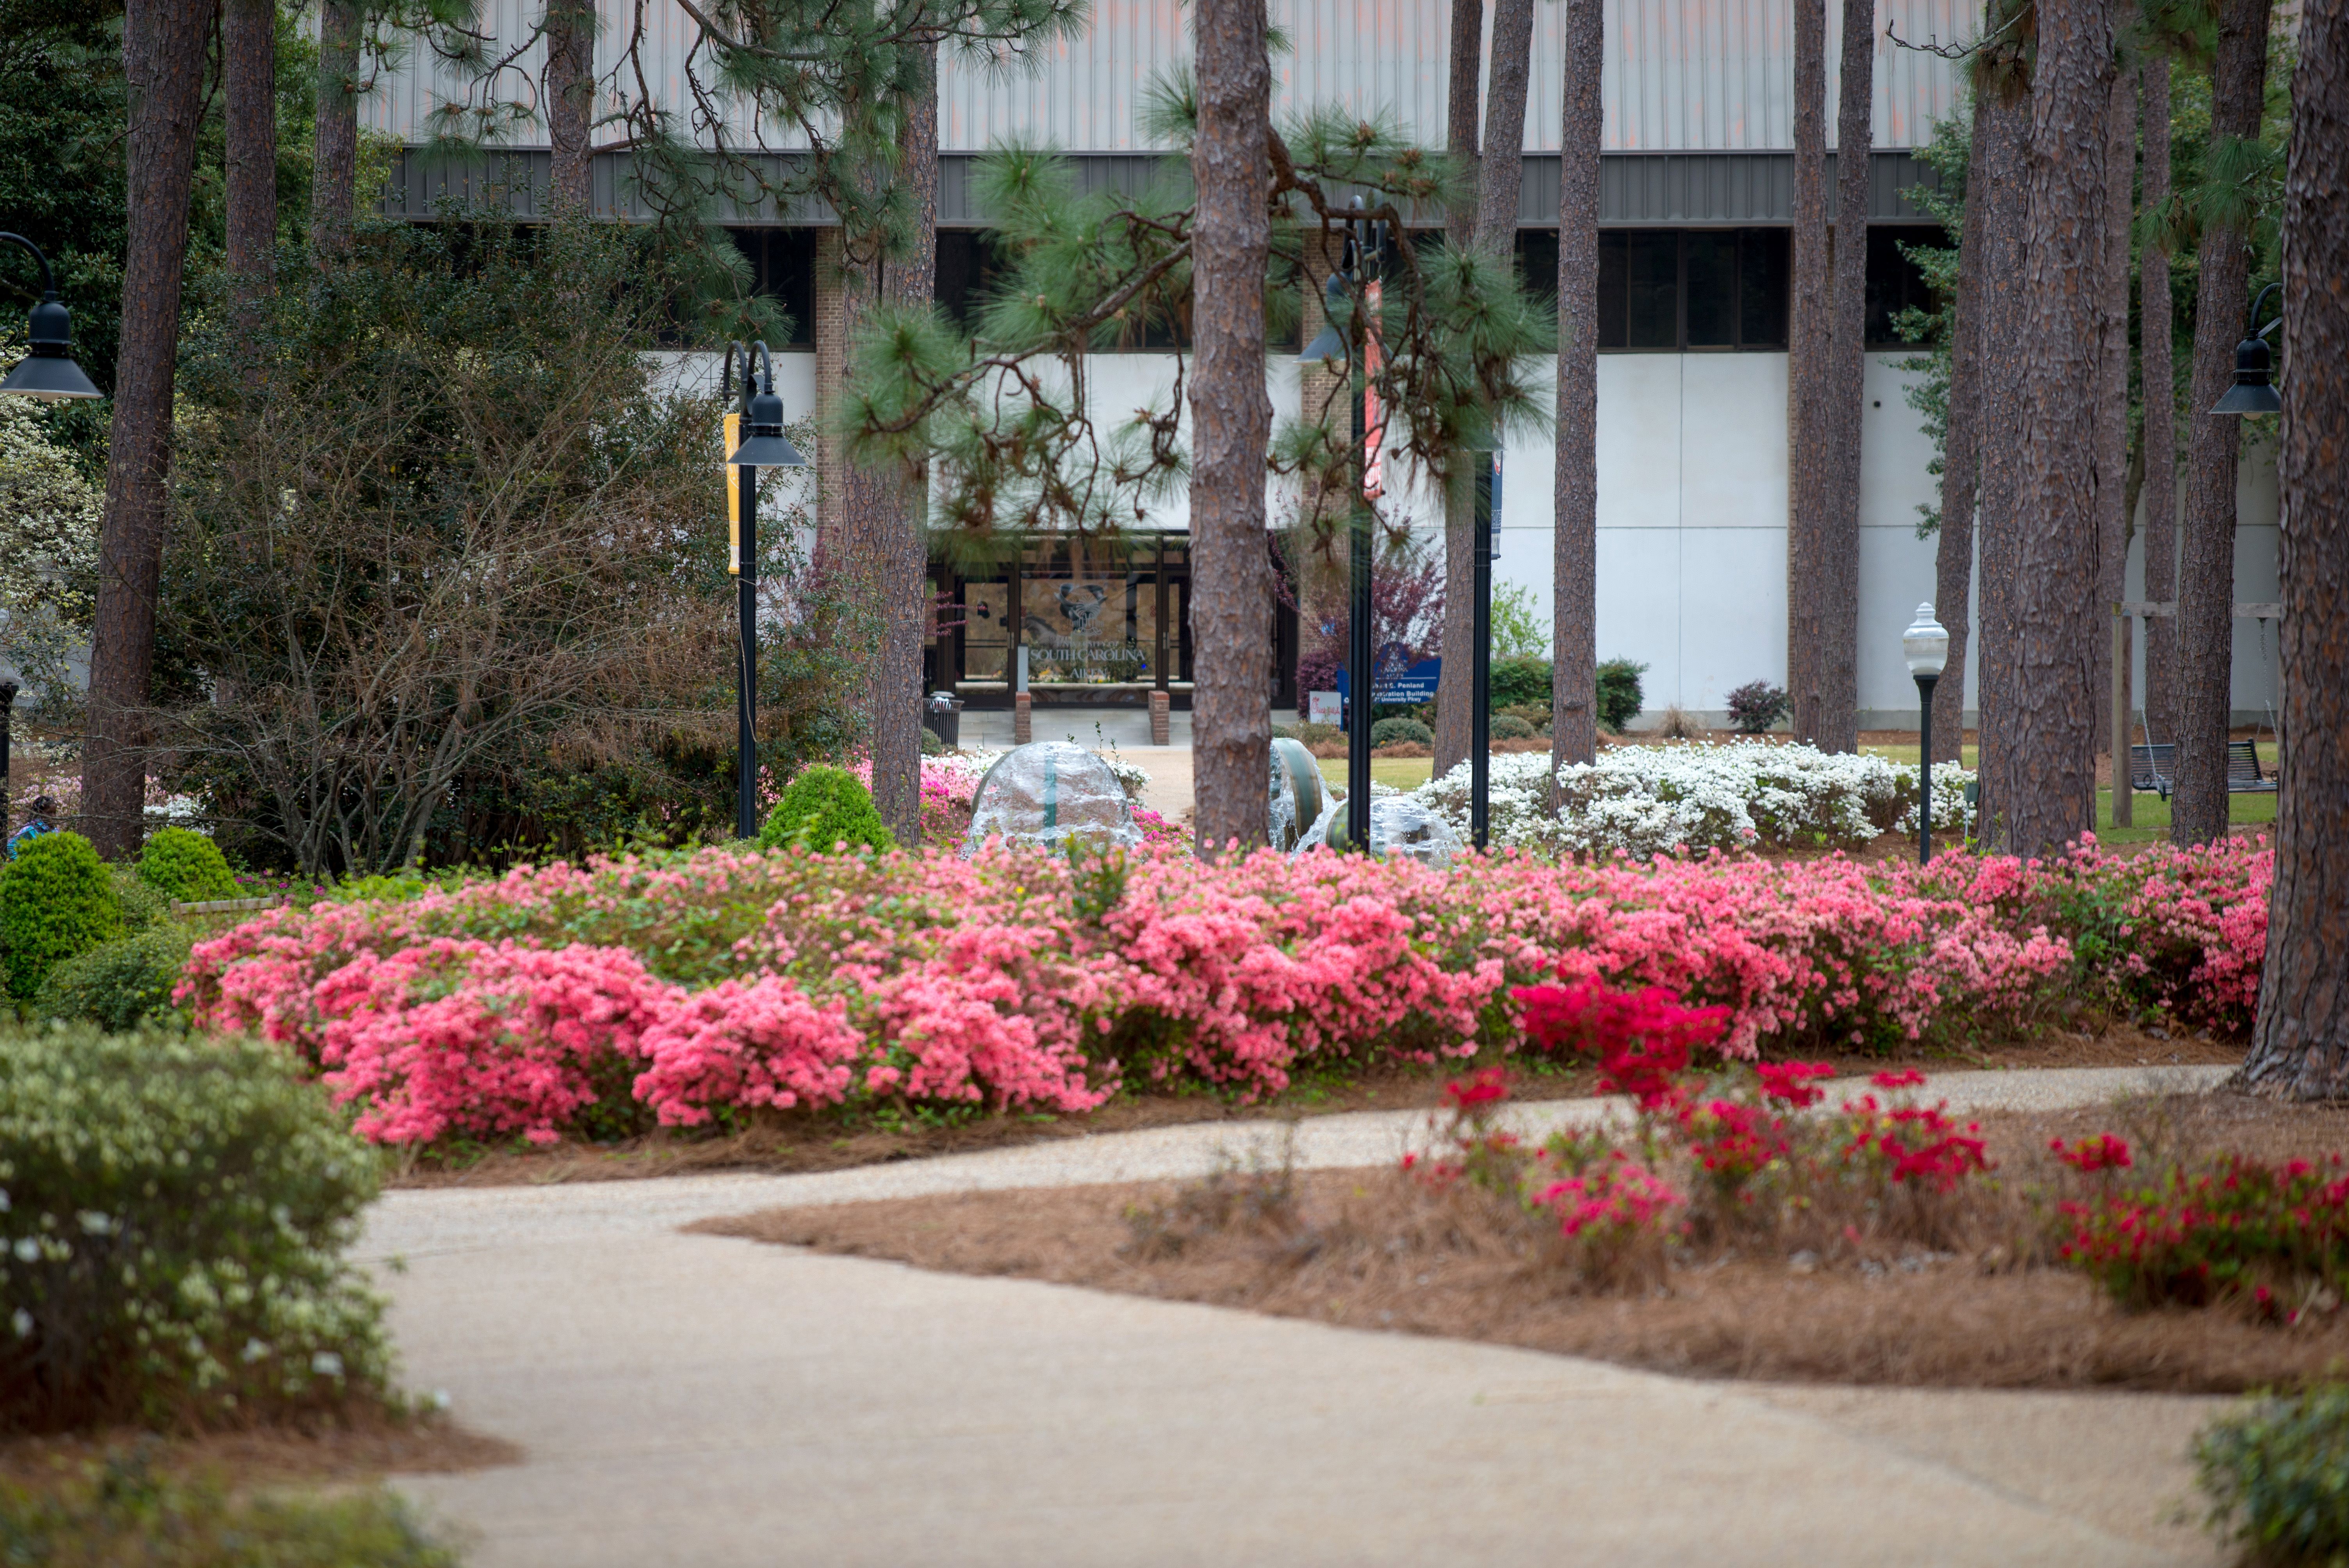 Wide shot of the quad with flowers blooming on bushes